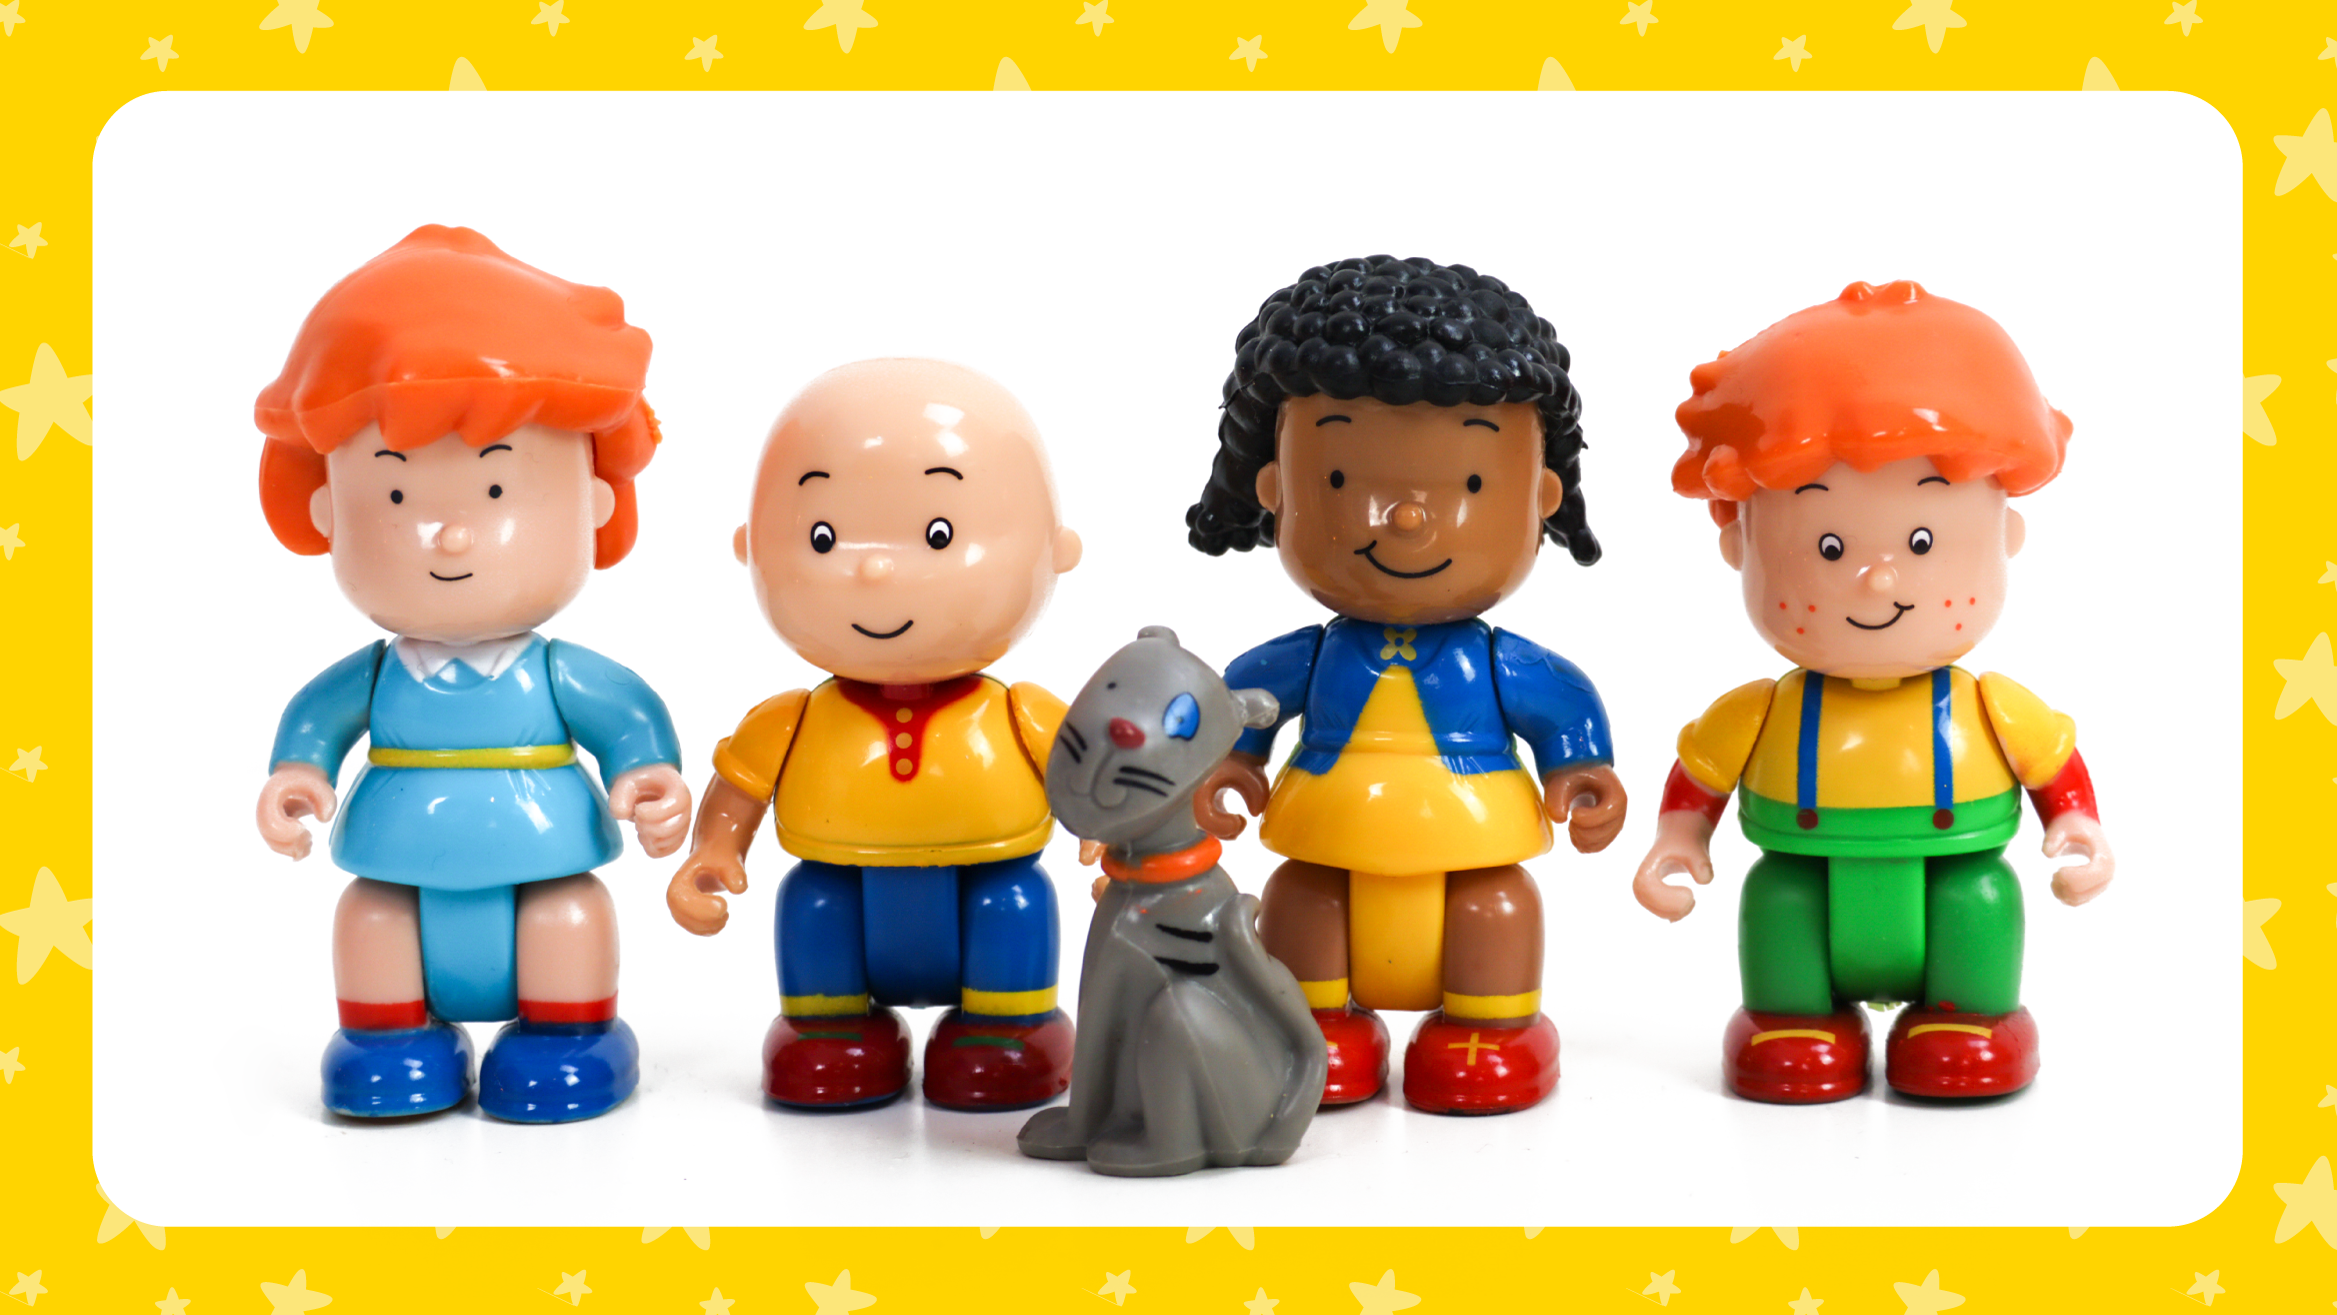 🎄 Christmas Tree for Caillou Figures! 🎄 Caillou